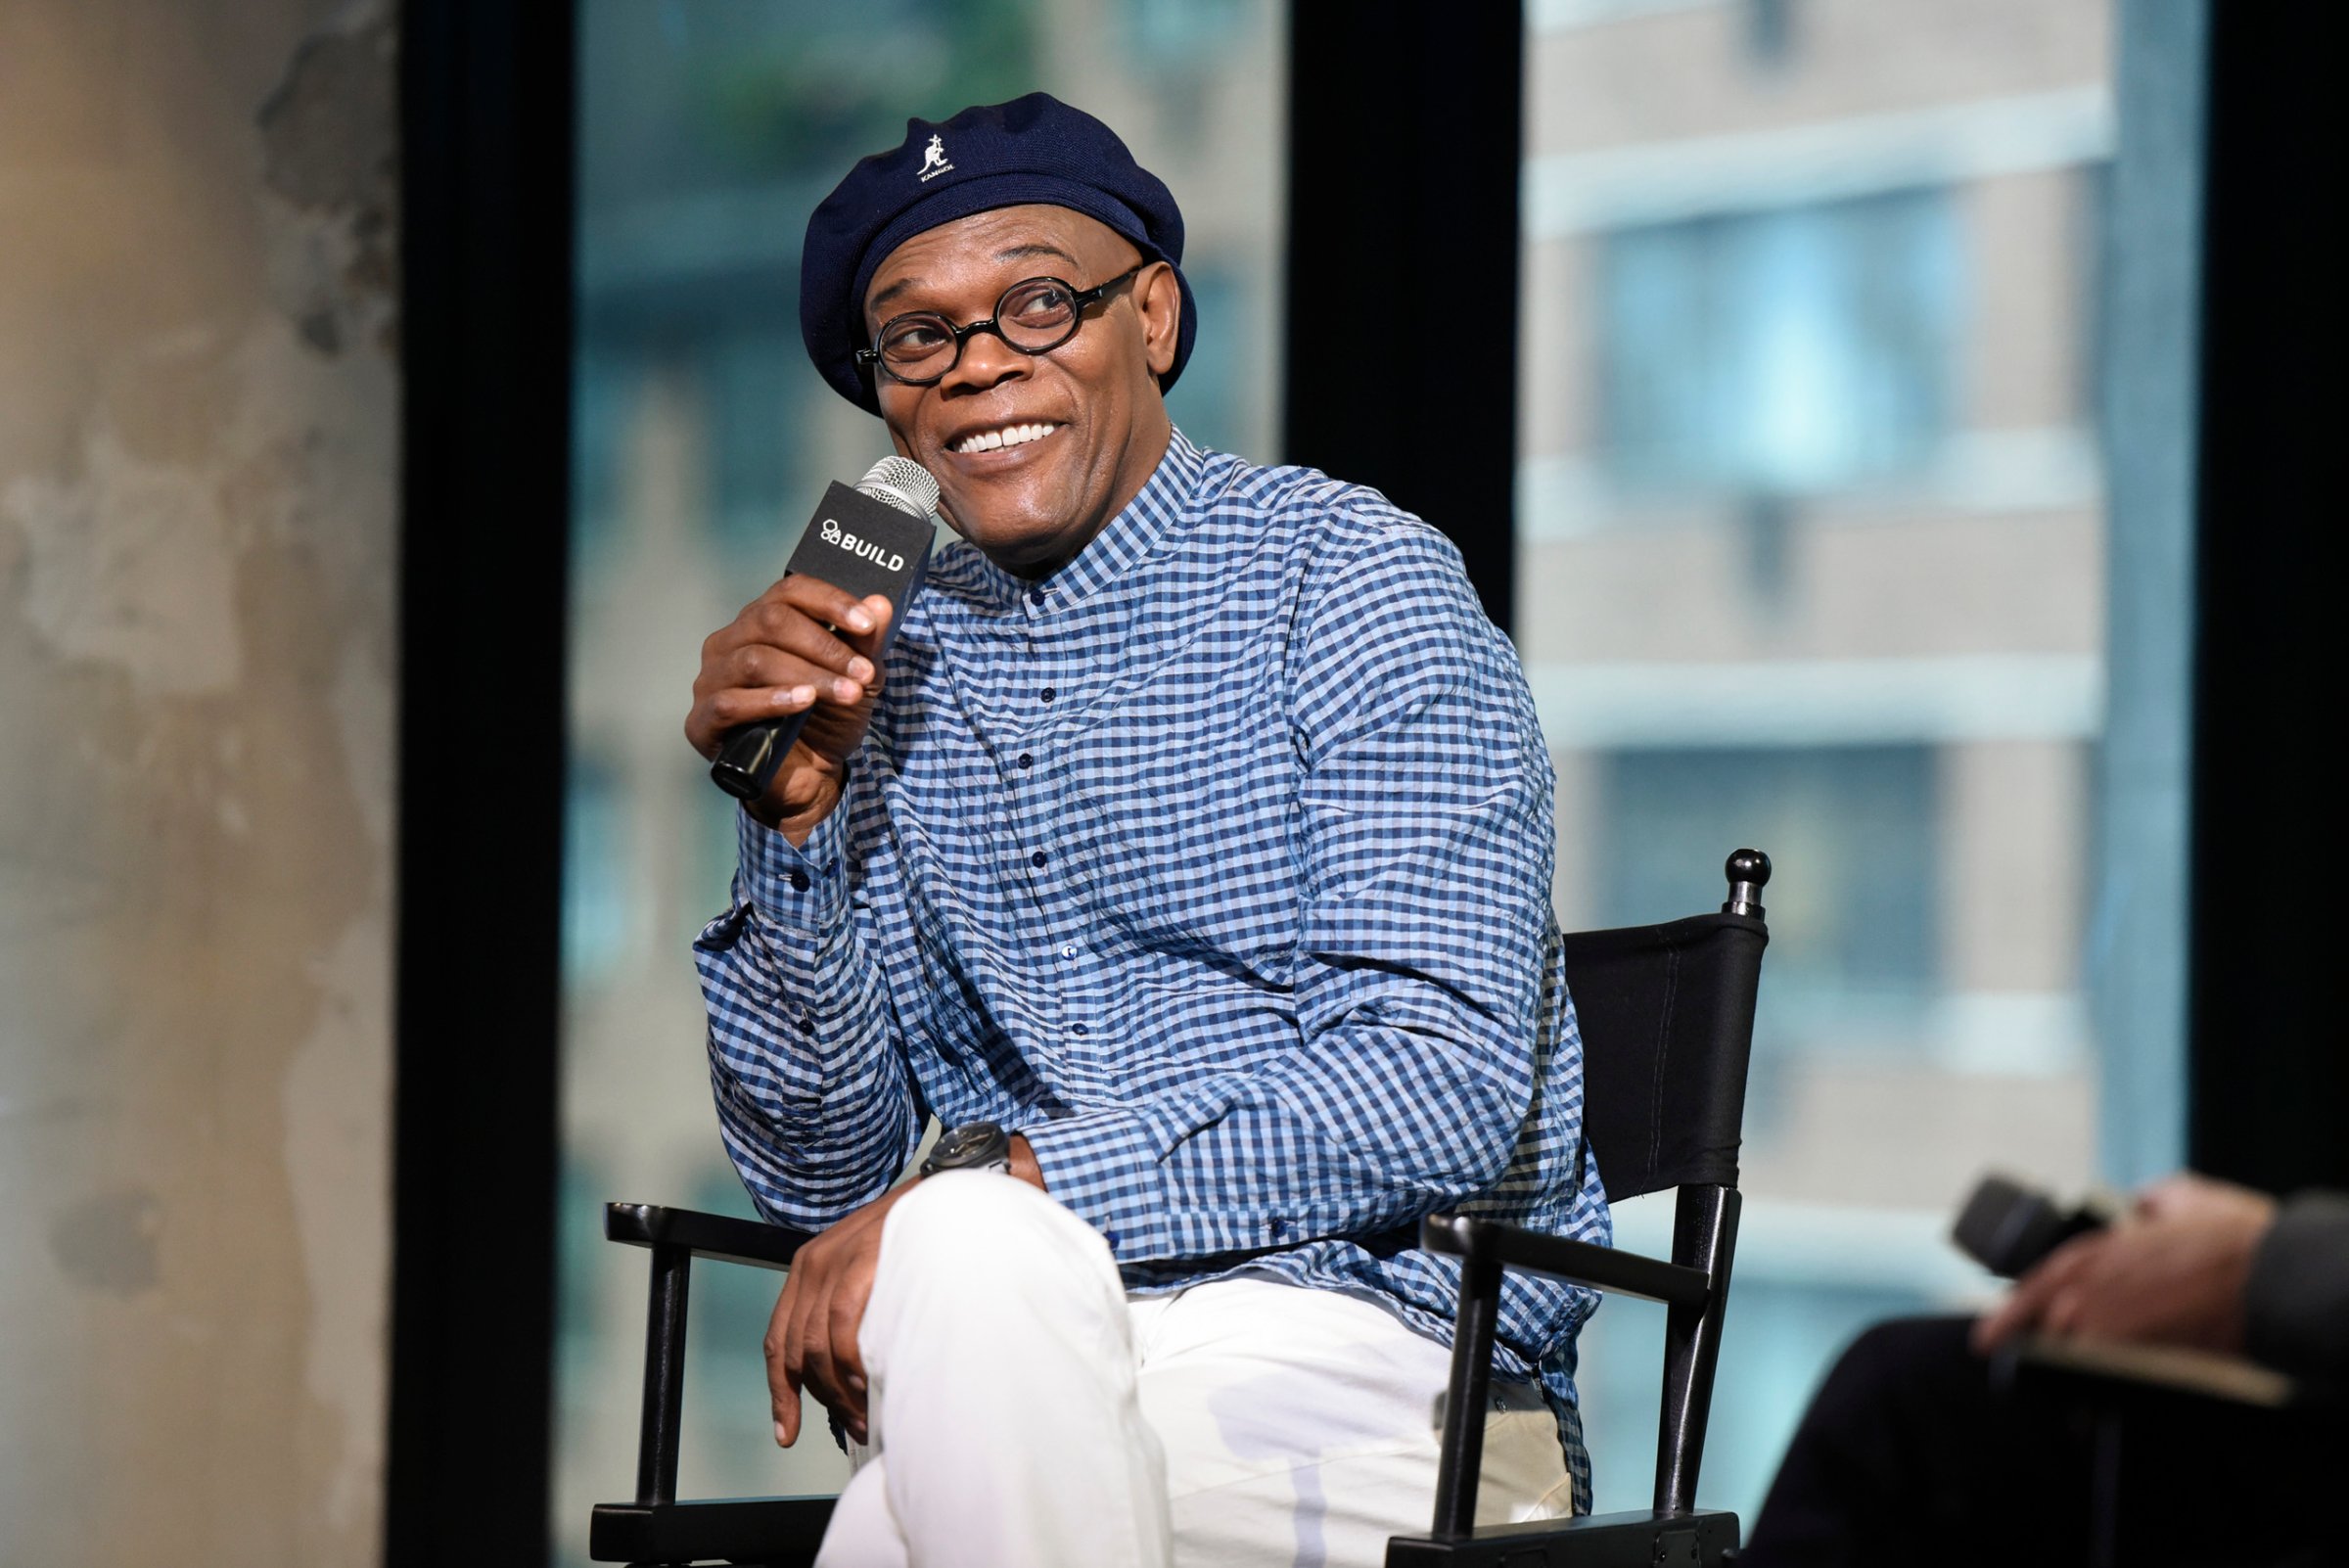 Samuel L. Jackson attends AOL Build Presents - Samuel L. Jackson from the new movie "The Legend Of Tarzan" at AOL Studios in New York City on June 29, 2016.